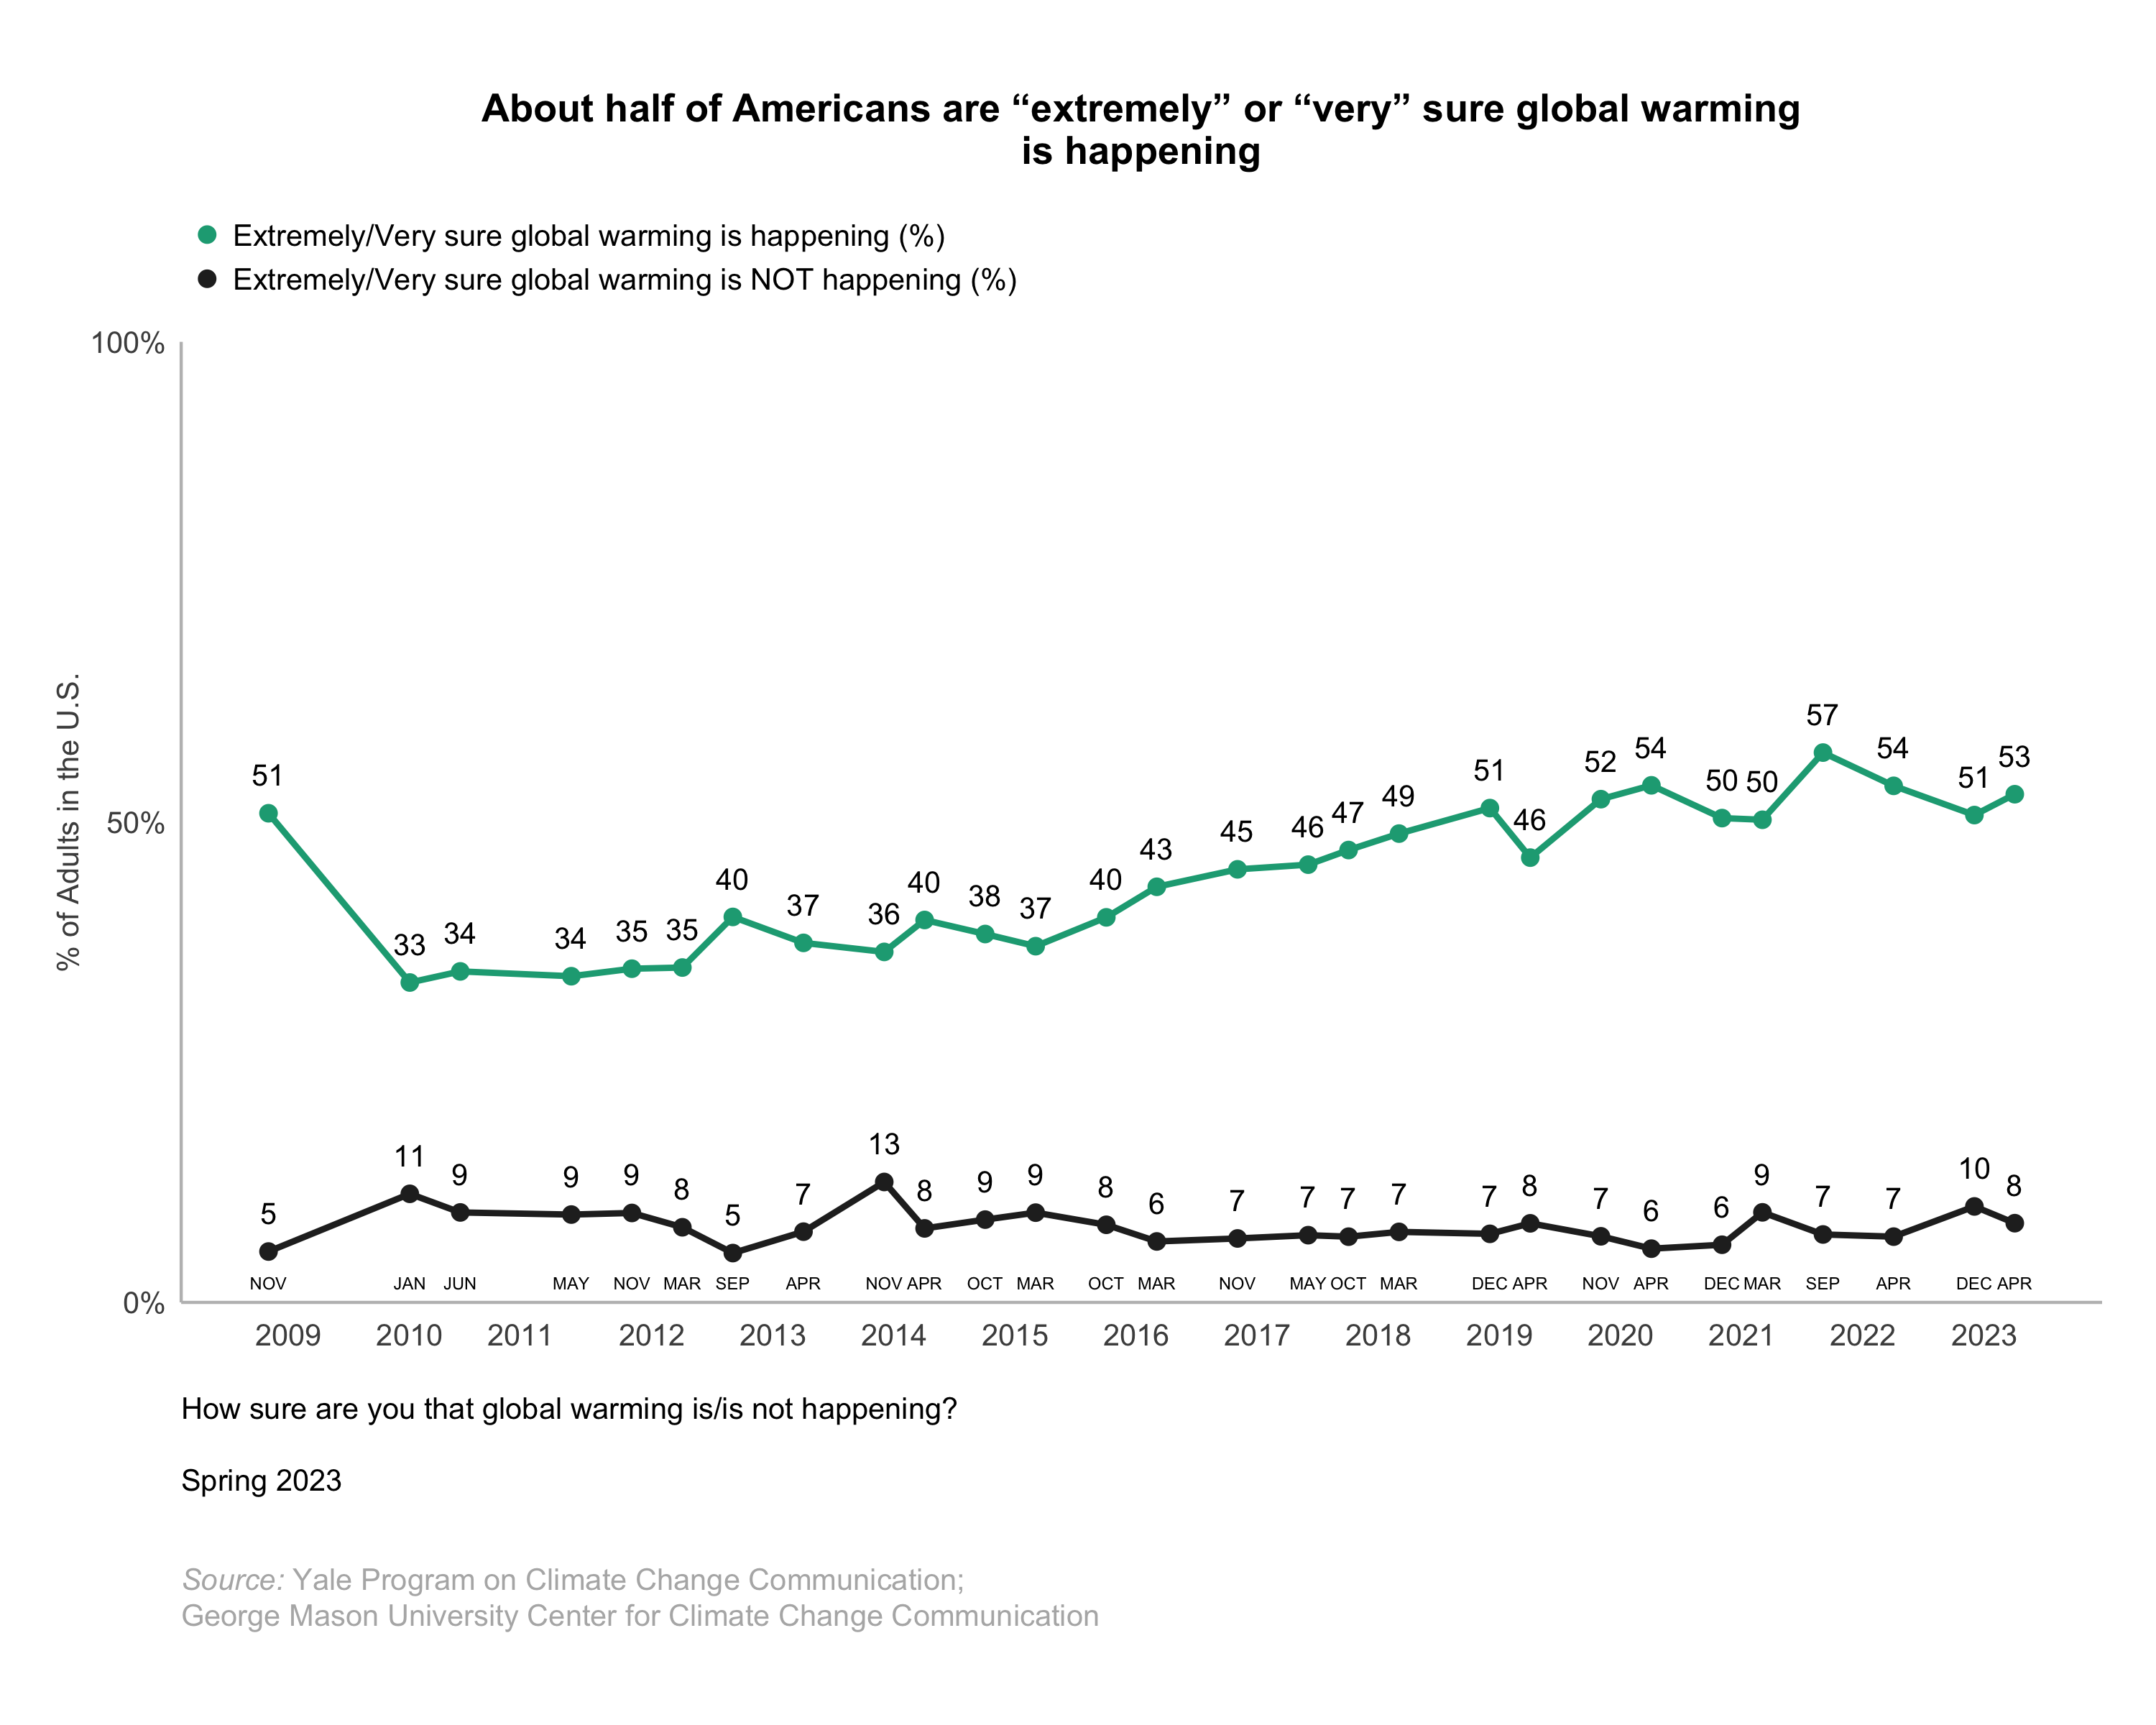 This line graph shows the percentage of Americans who are "extremely" or "very" sure that global warming is happening or not happening over time since 2008. About half of Americans are "extremely" or "very" sure global warming is happening. Data: Climate Change in the American Mind, Spring 2023. Refer to the data tables in Appendix 1 of the report for all percentages.